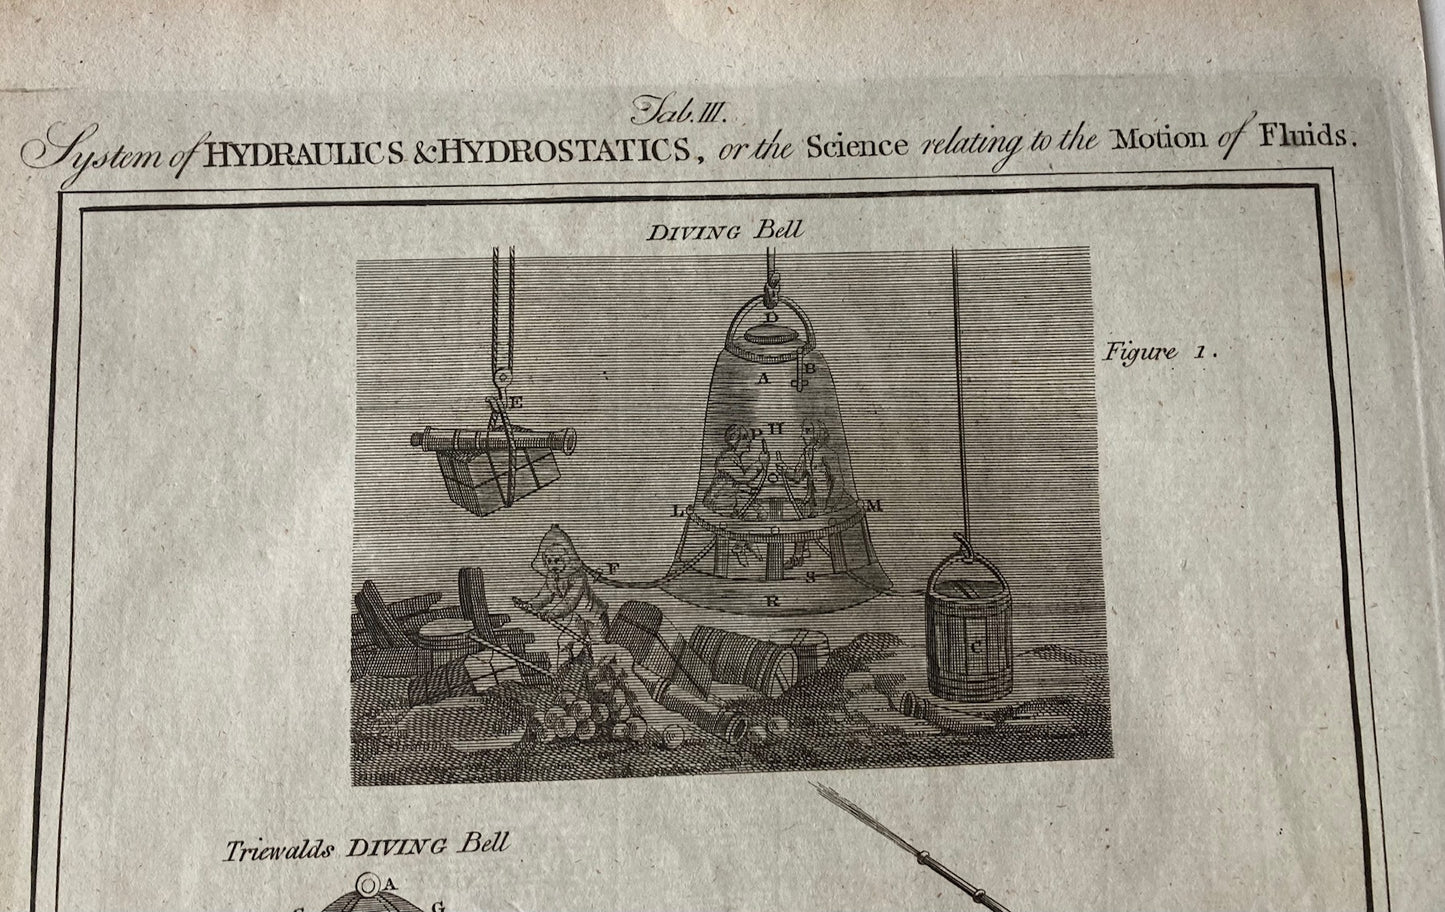 Engraving of Early Diving Bell, circa 1790's